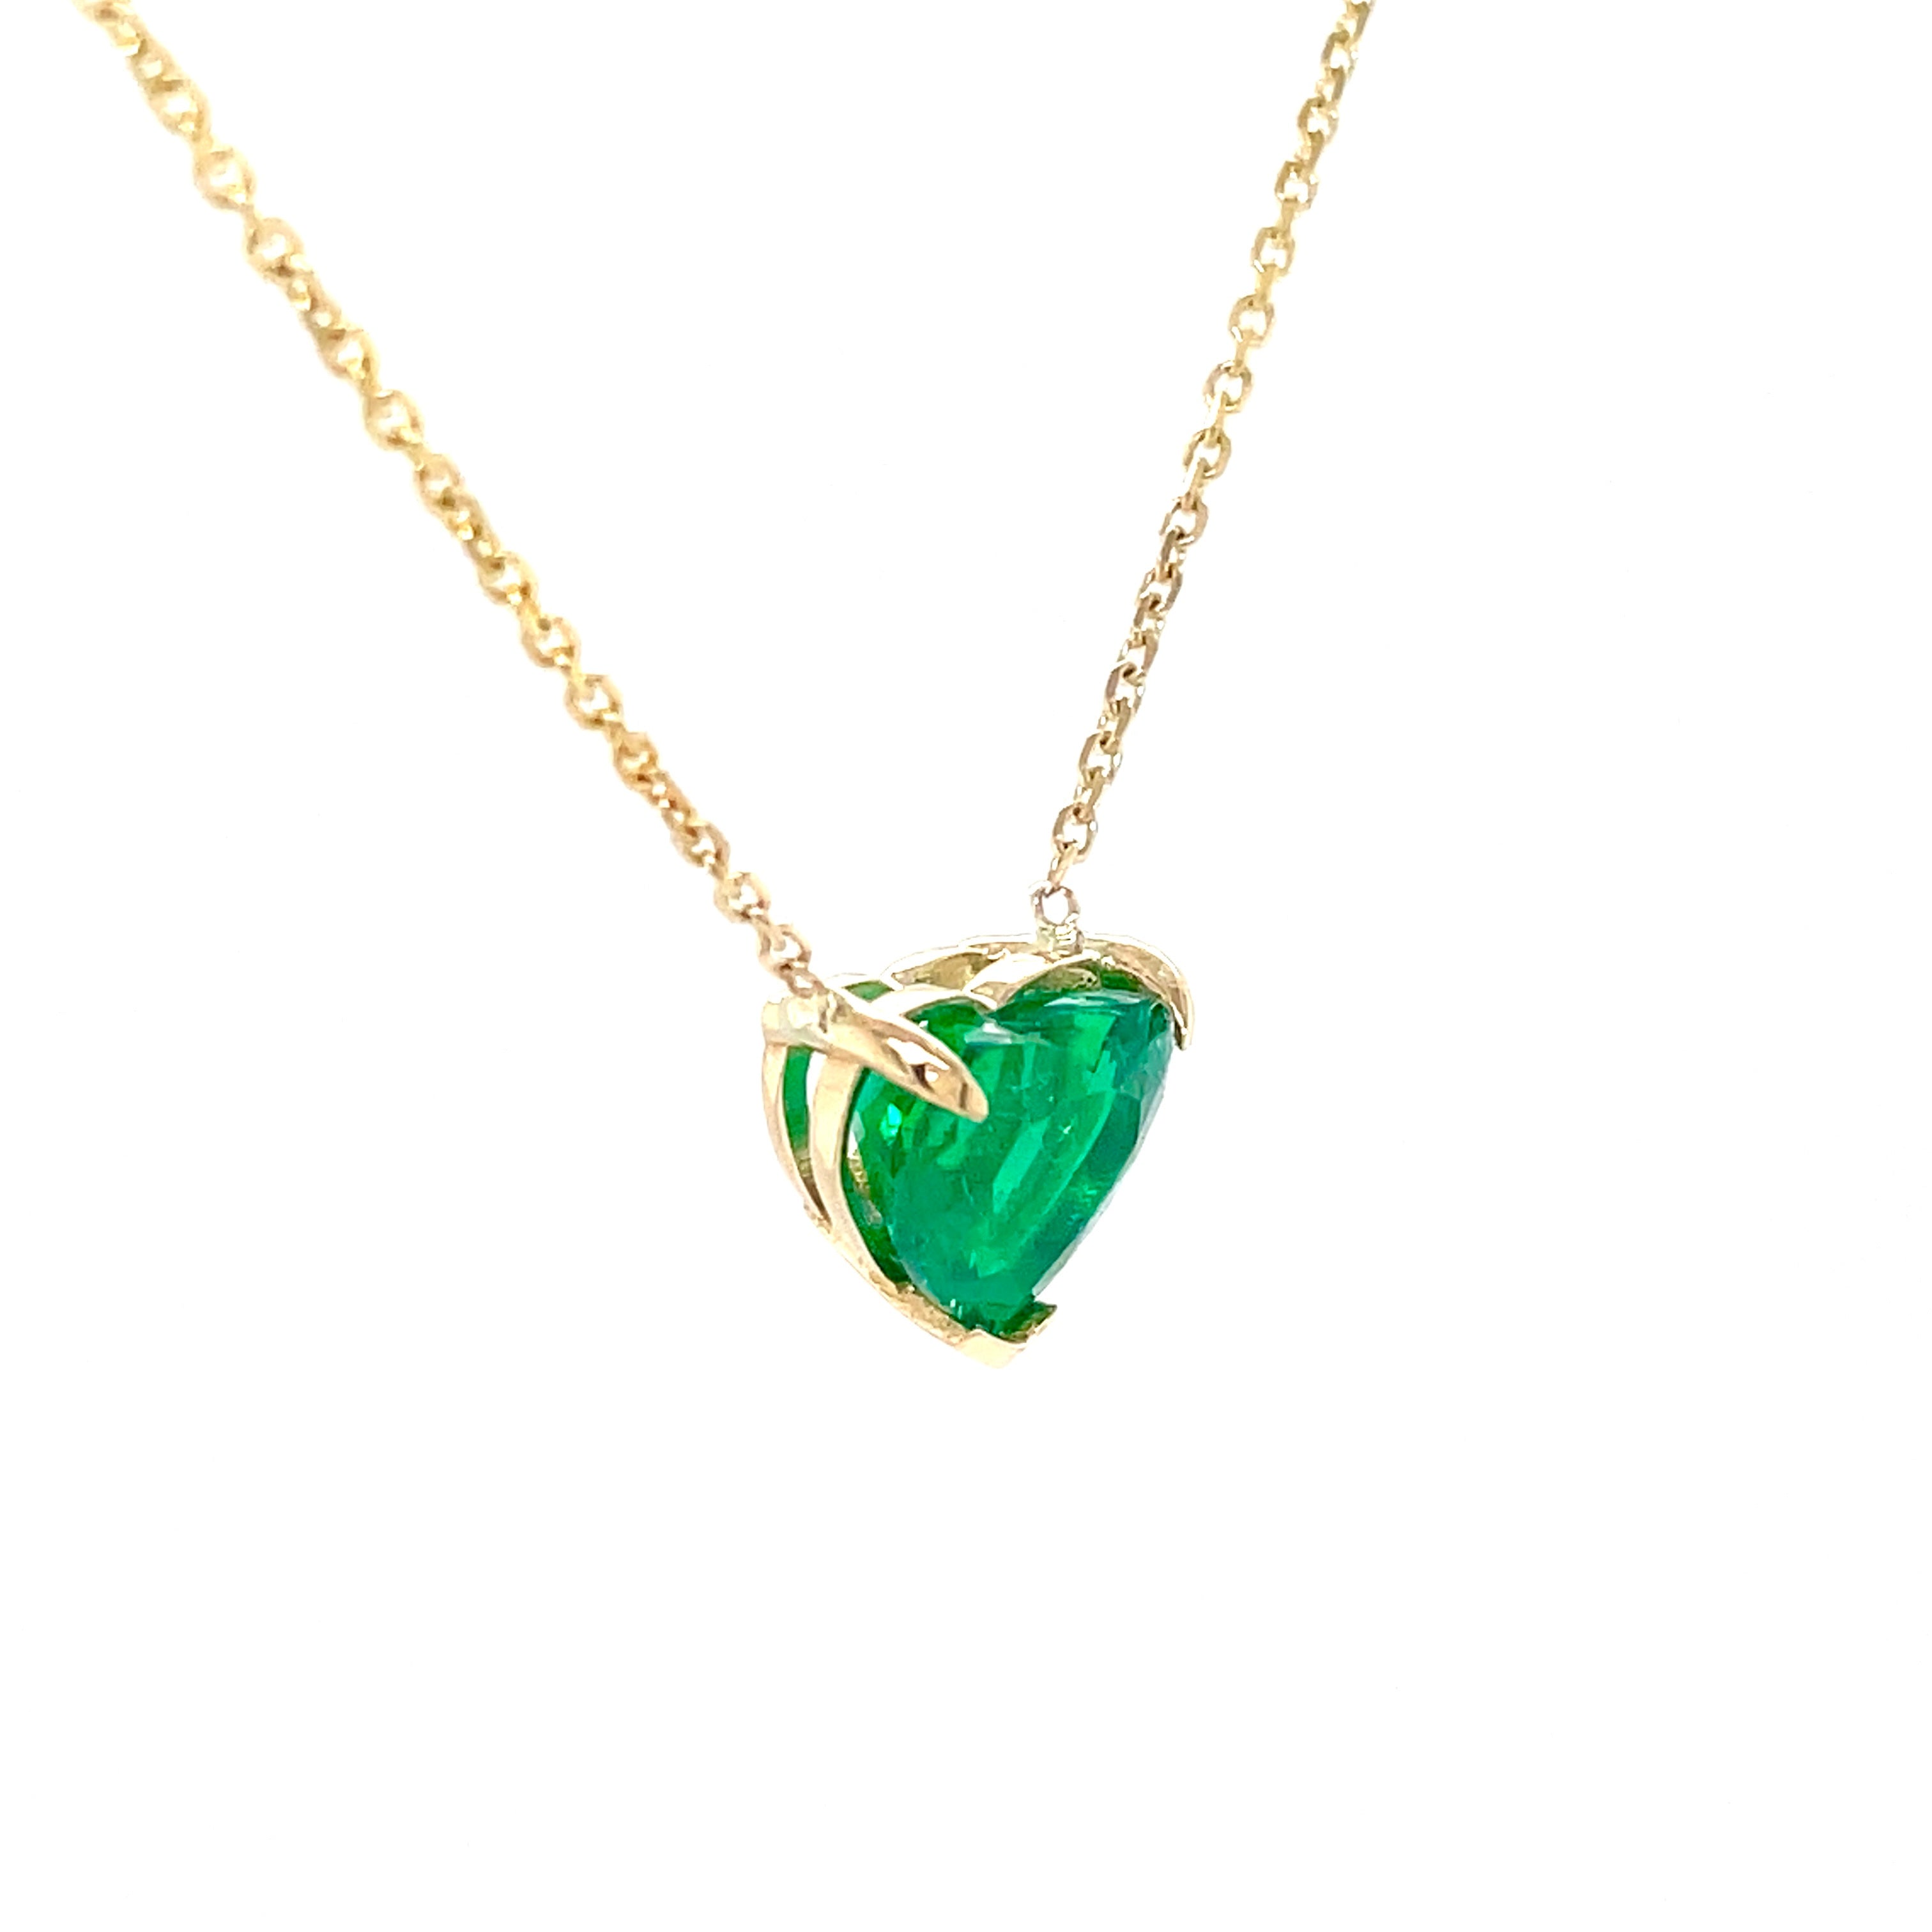 Emerald heart necklace  Perfect for Valentines   From Muzo mines  One heart shape diamond 1.90 cts  14K yellow gold basket setting  18" long.